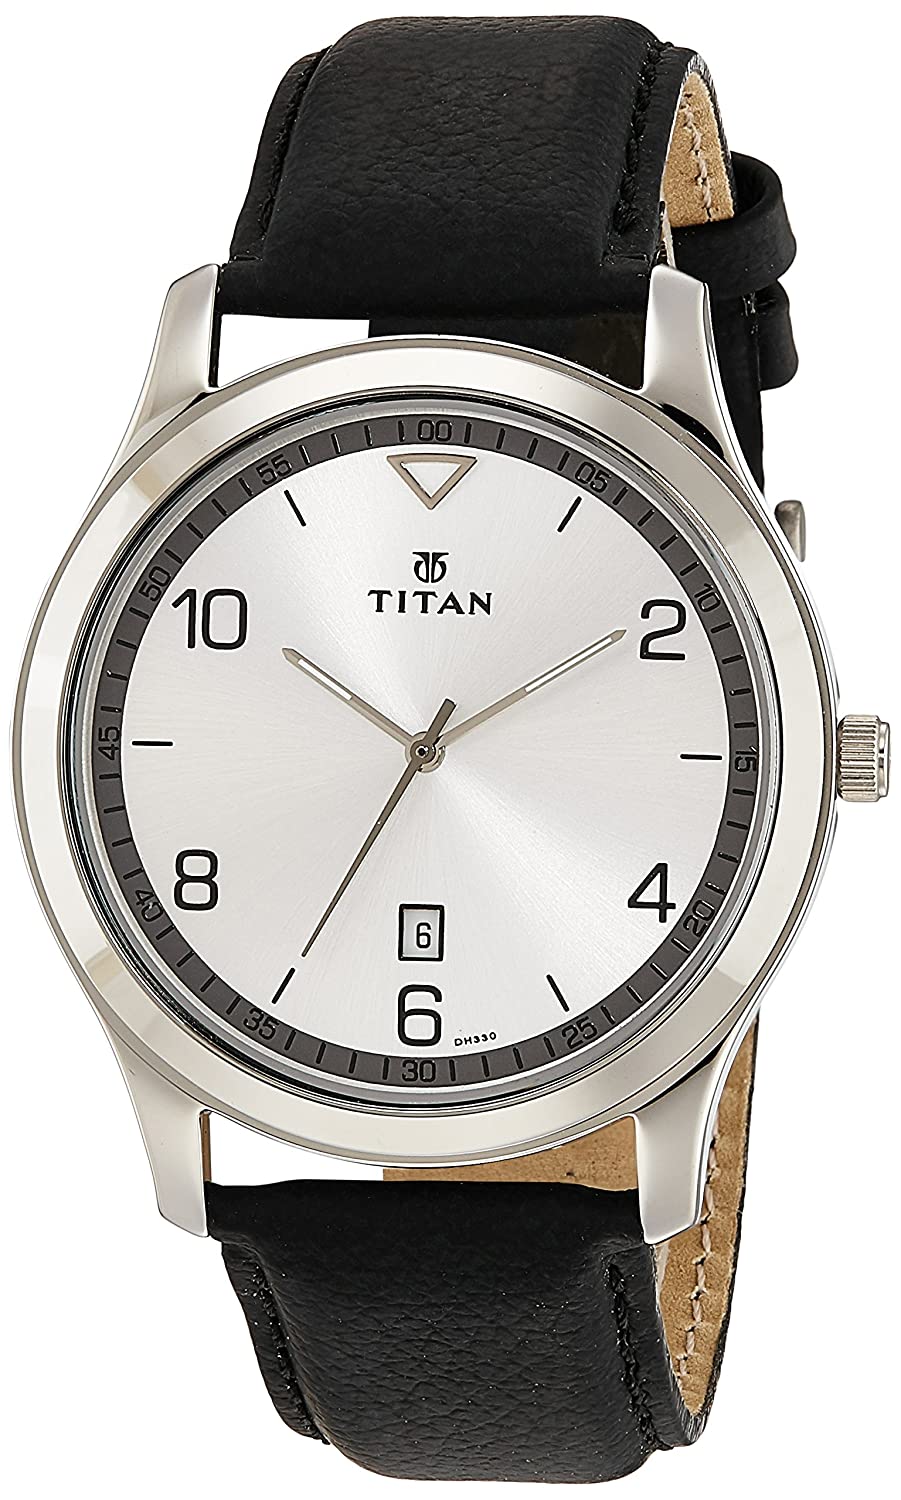 Titan Men’s Analog Watch 1770SL01 | Leather Band | Water-Resistant | Quartz Movement | Classic Style | Fashionable | Durable | Affordable | Halabh.com